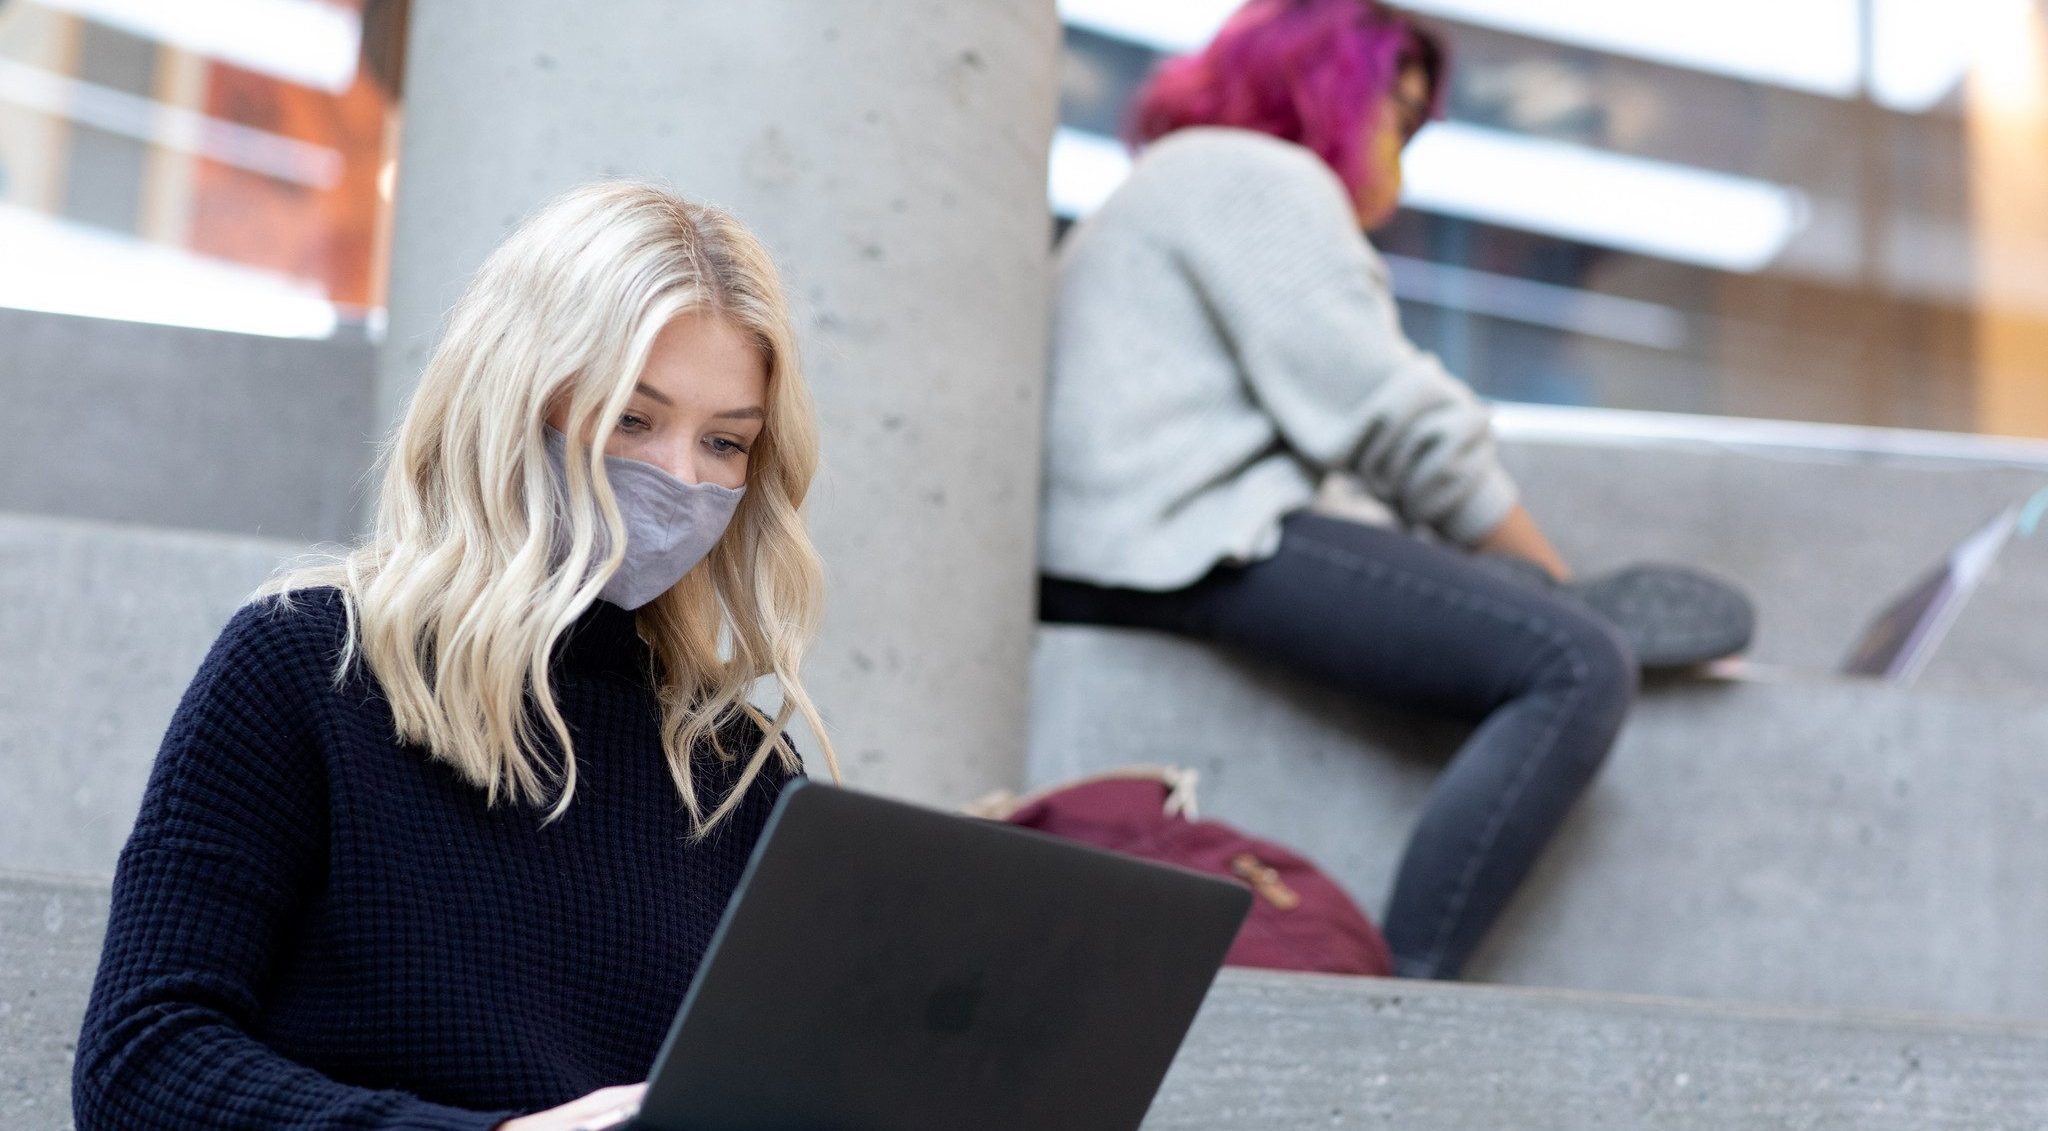 Two students sit on concrete steps inside the Fipke building. In the forebround, a student with blonde hair and a grey cloth mask looks down at their laptop. In the background, a student with pink hair does the same.